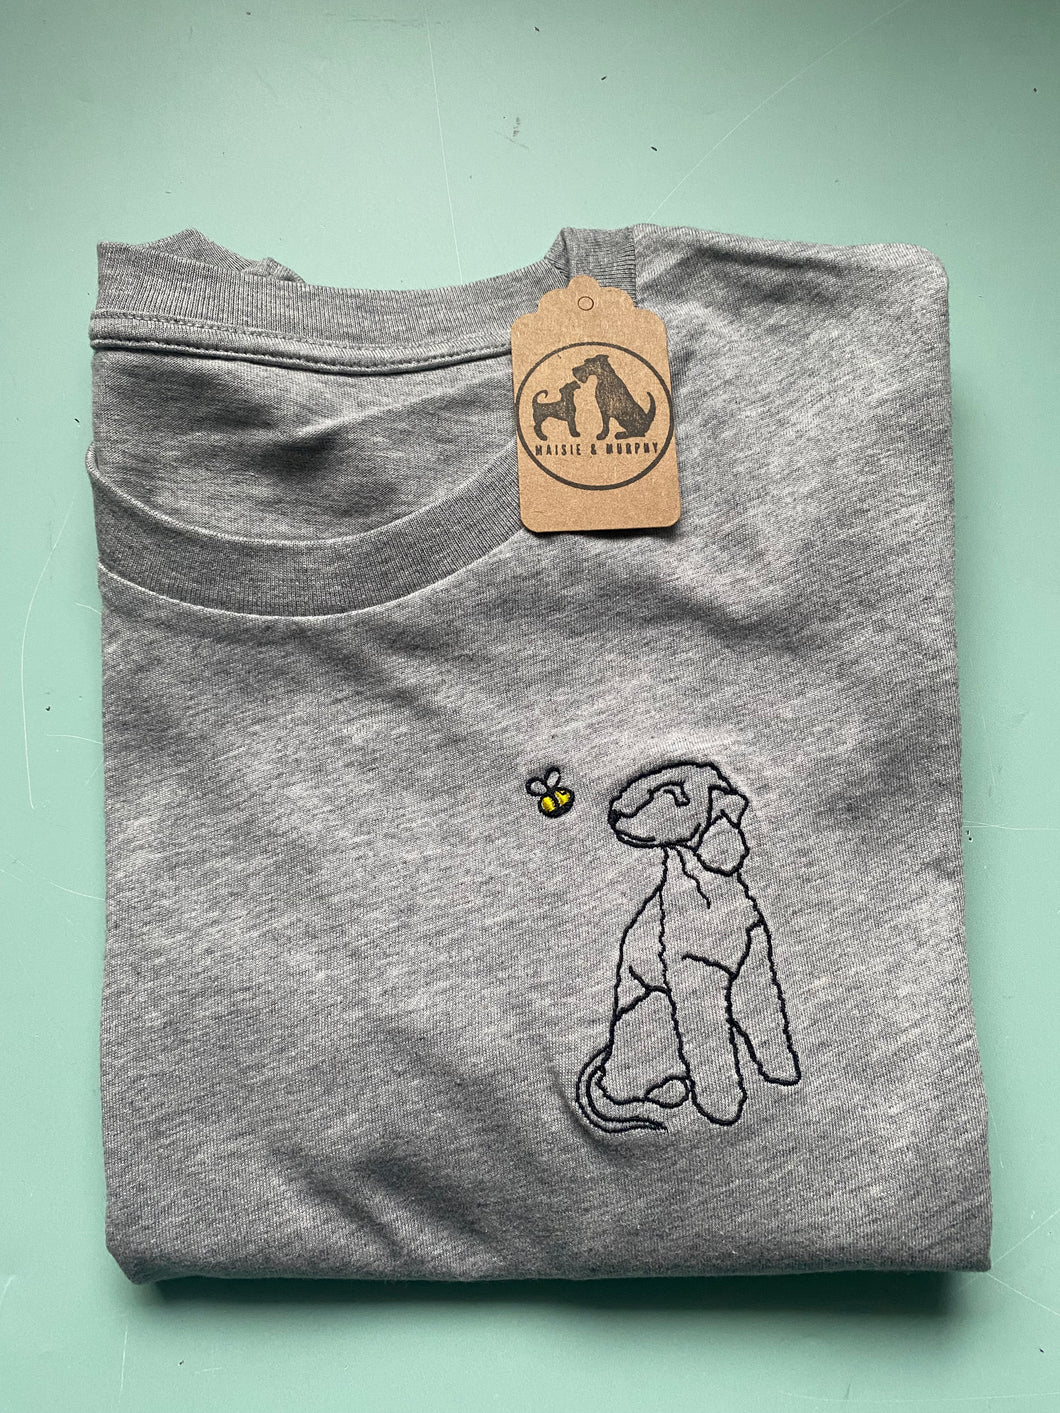 Bedlington Terrier Outline T-shirt - embroidered Bedlington organic tee for dog lovers and owners